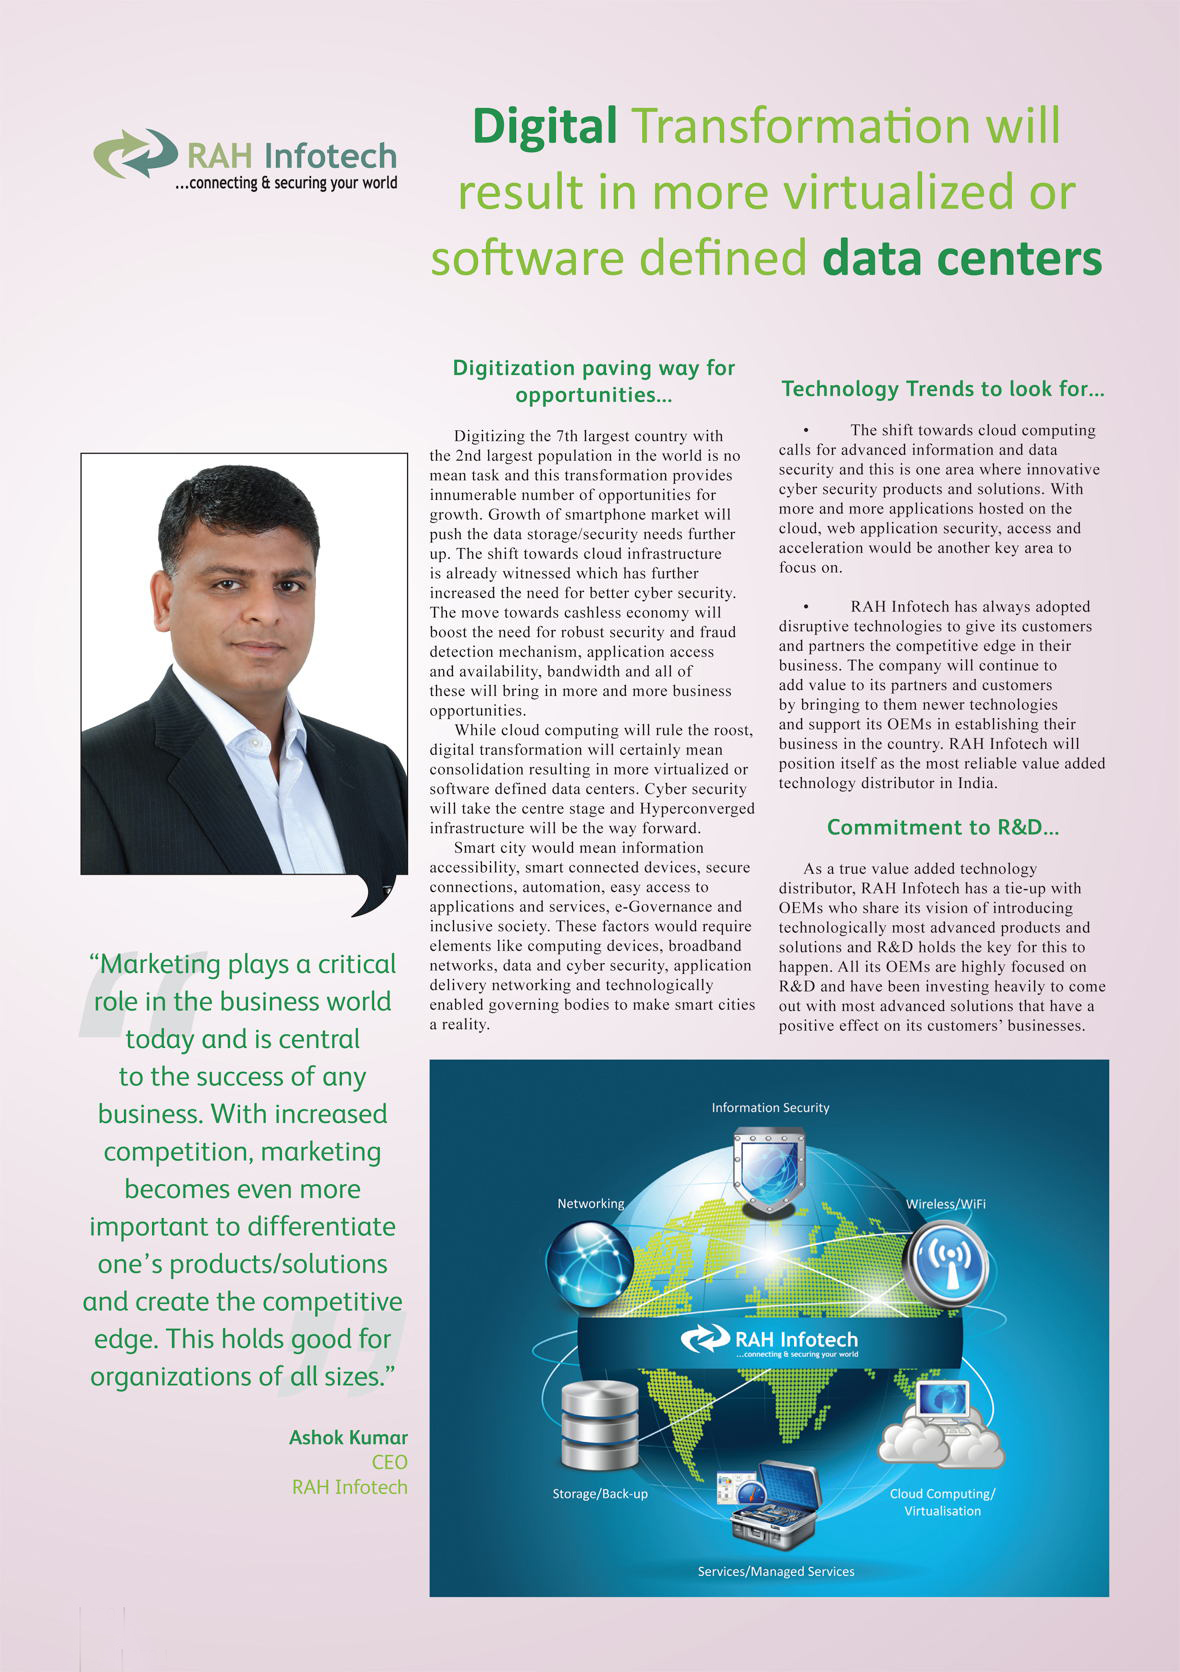 RAH Infotech : Digital Transformation will result in more virtualized or software defined data centers